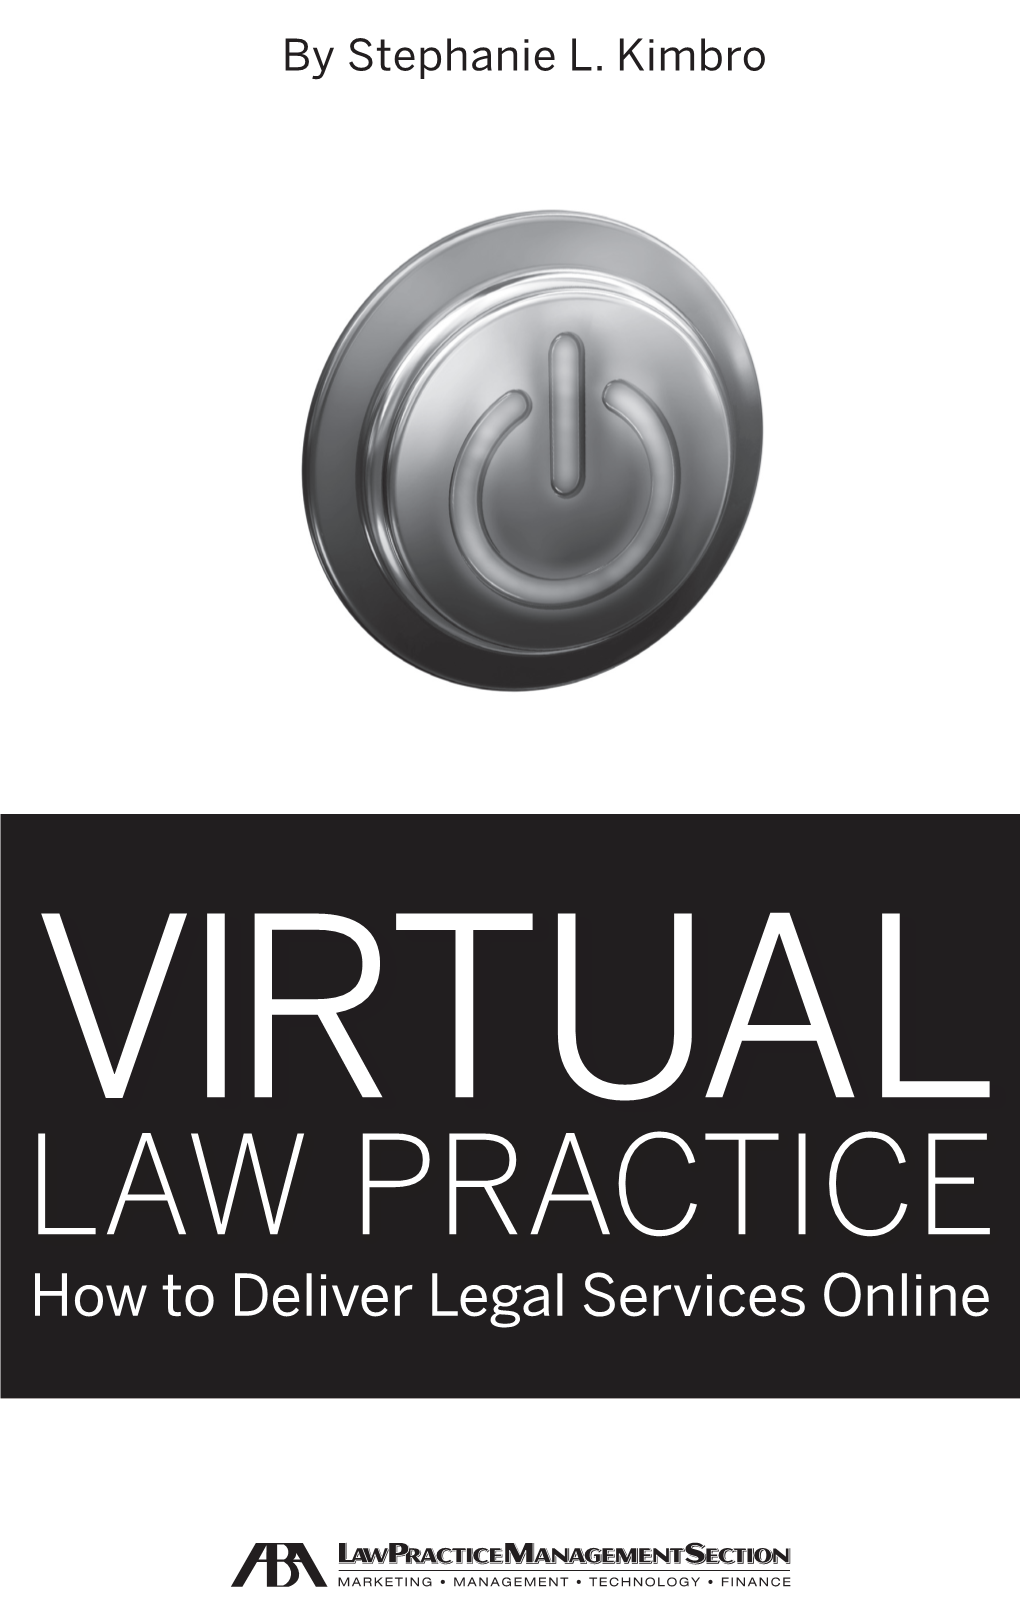 Virtual Law Practice How to Deliver Legal Services Online Virtual Law 11/12/10 10:53 AM Page Ii